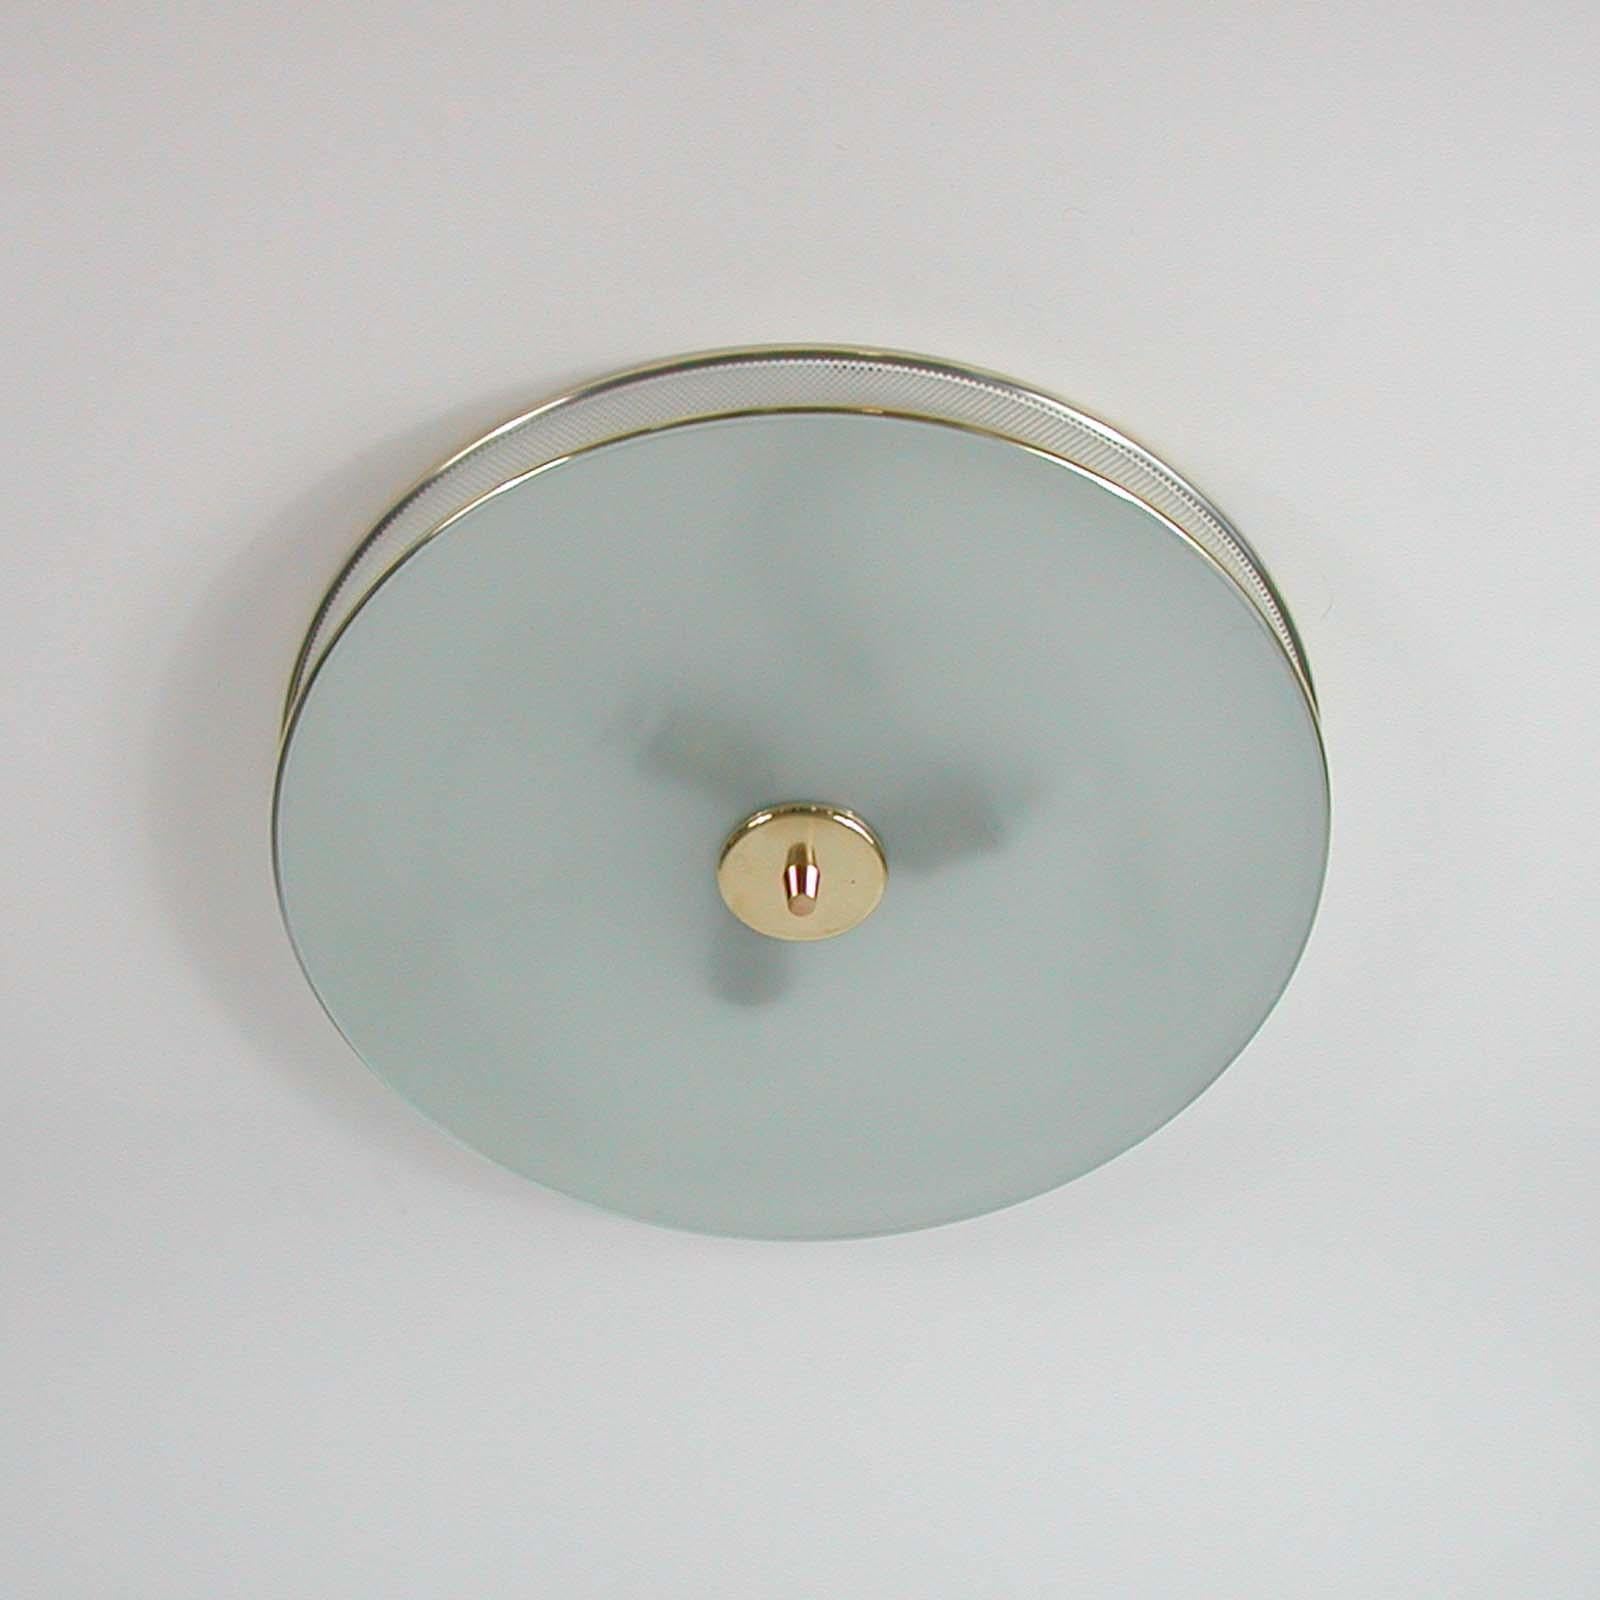 Mid-20th Century French Midcentury Cream White and Brass Mategot Style Flush Mount, 1950s For Sale